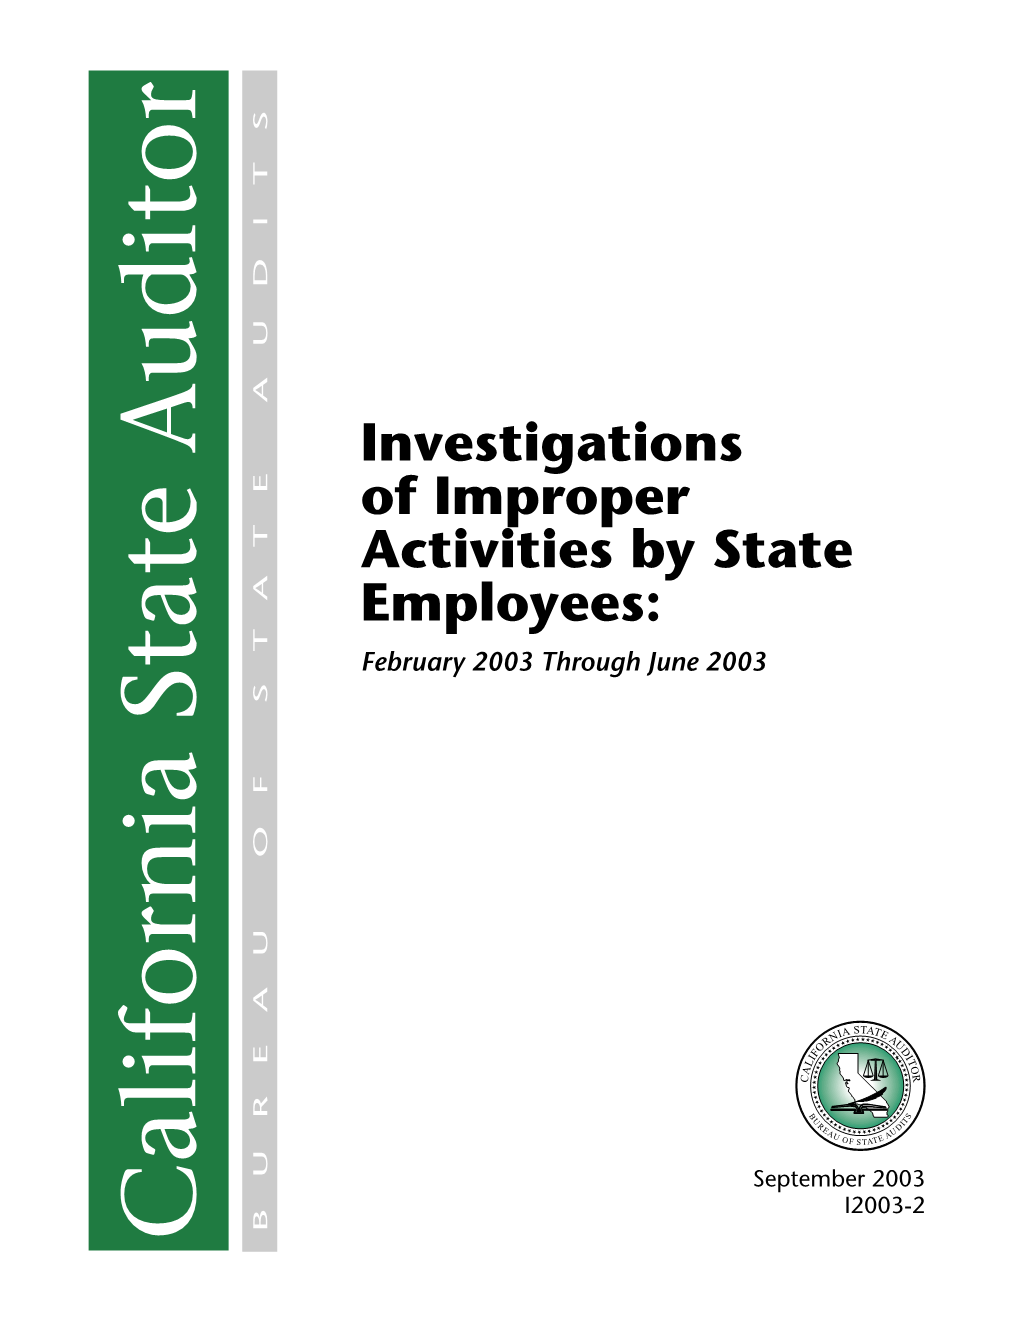 Investigations of Improper Activities by State Employees: February 2003 Through June 2003